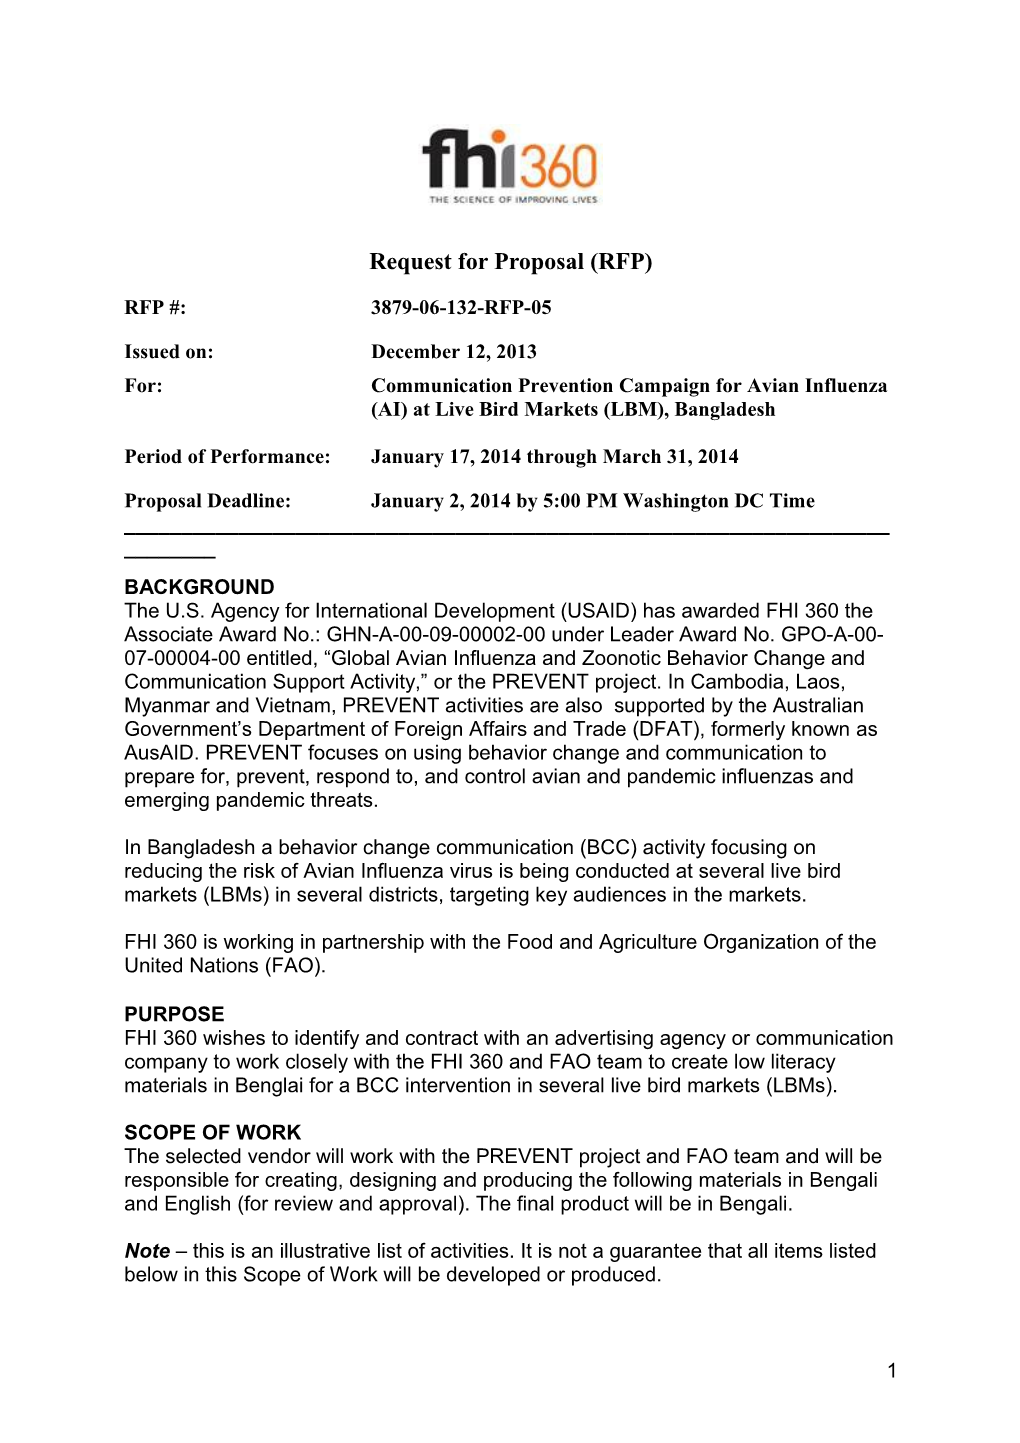 Request for Proposal (RFP) s1